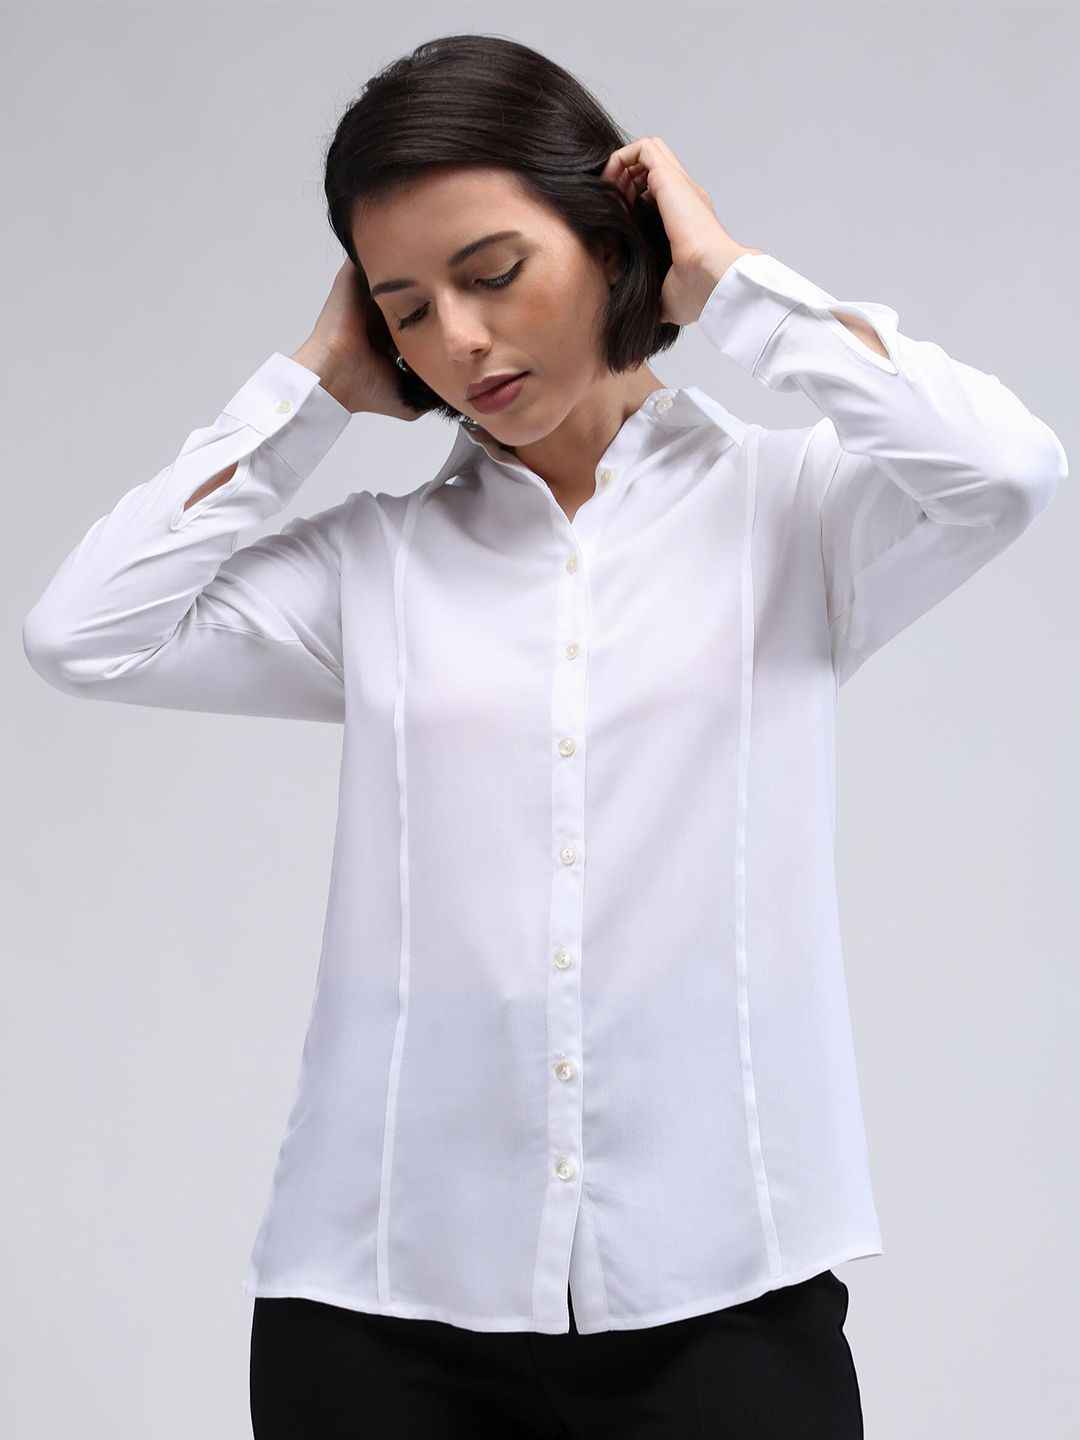 IDK Long Sleeves Shirt Style Top Price in India